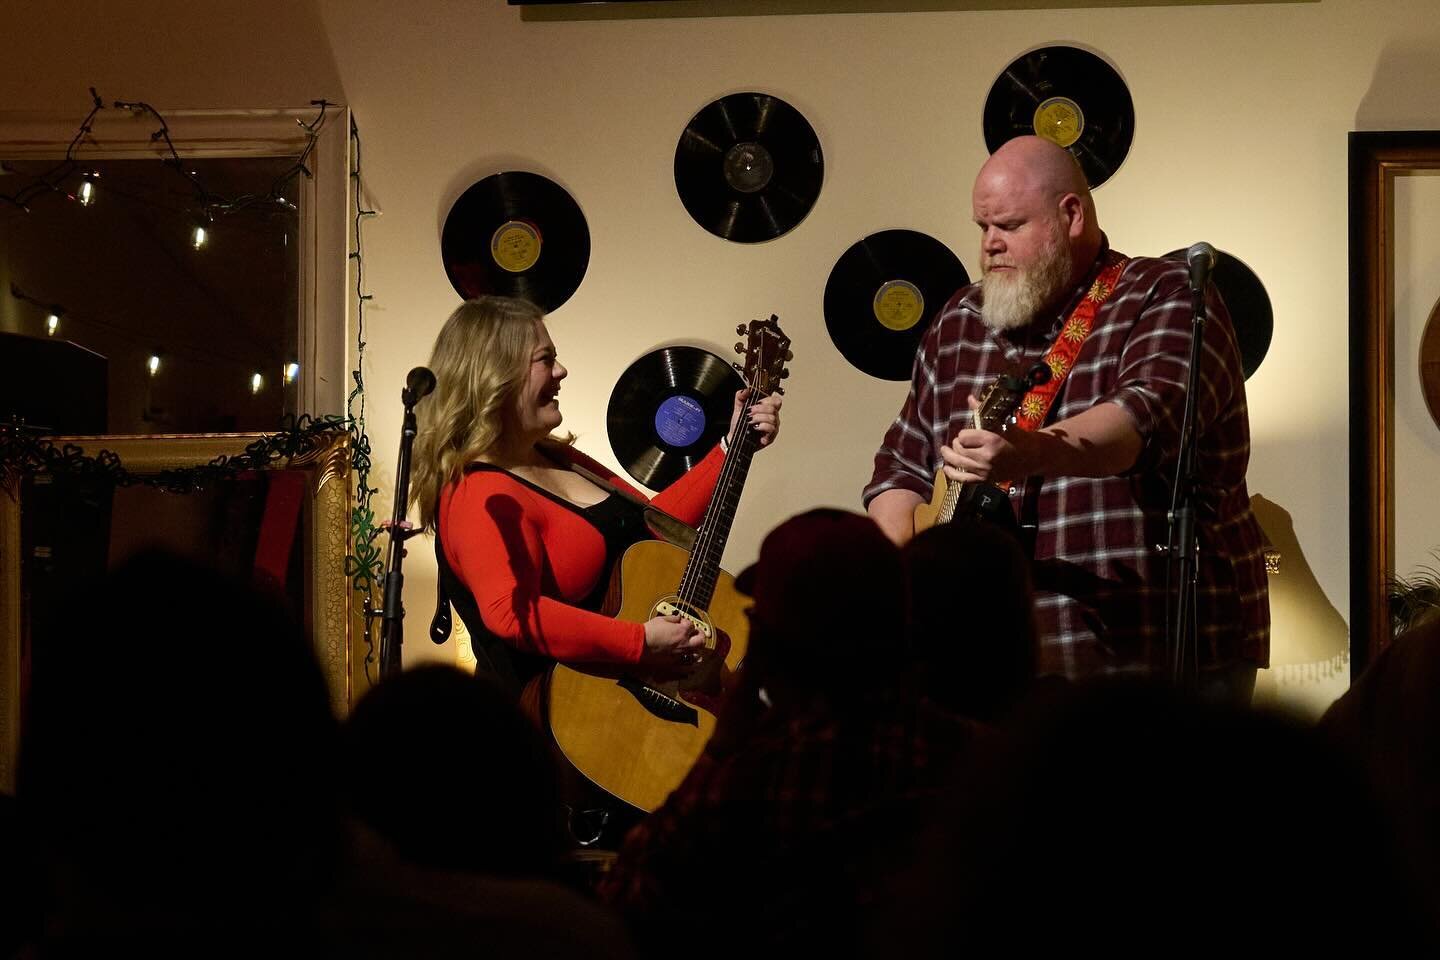 We had an incredible time at @maqbrew last week as the duo. It&rsquo;s such a wonderful space. And the vibe of the crowd? Dang. Perfection. Thank you to everyone that filled the place up, to Bob at ACE Radio &amp; TV and Lori for the amazing harmonie